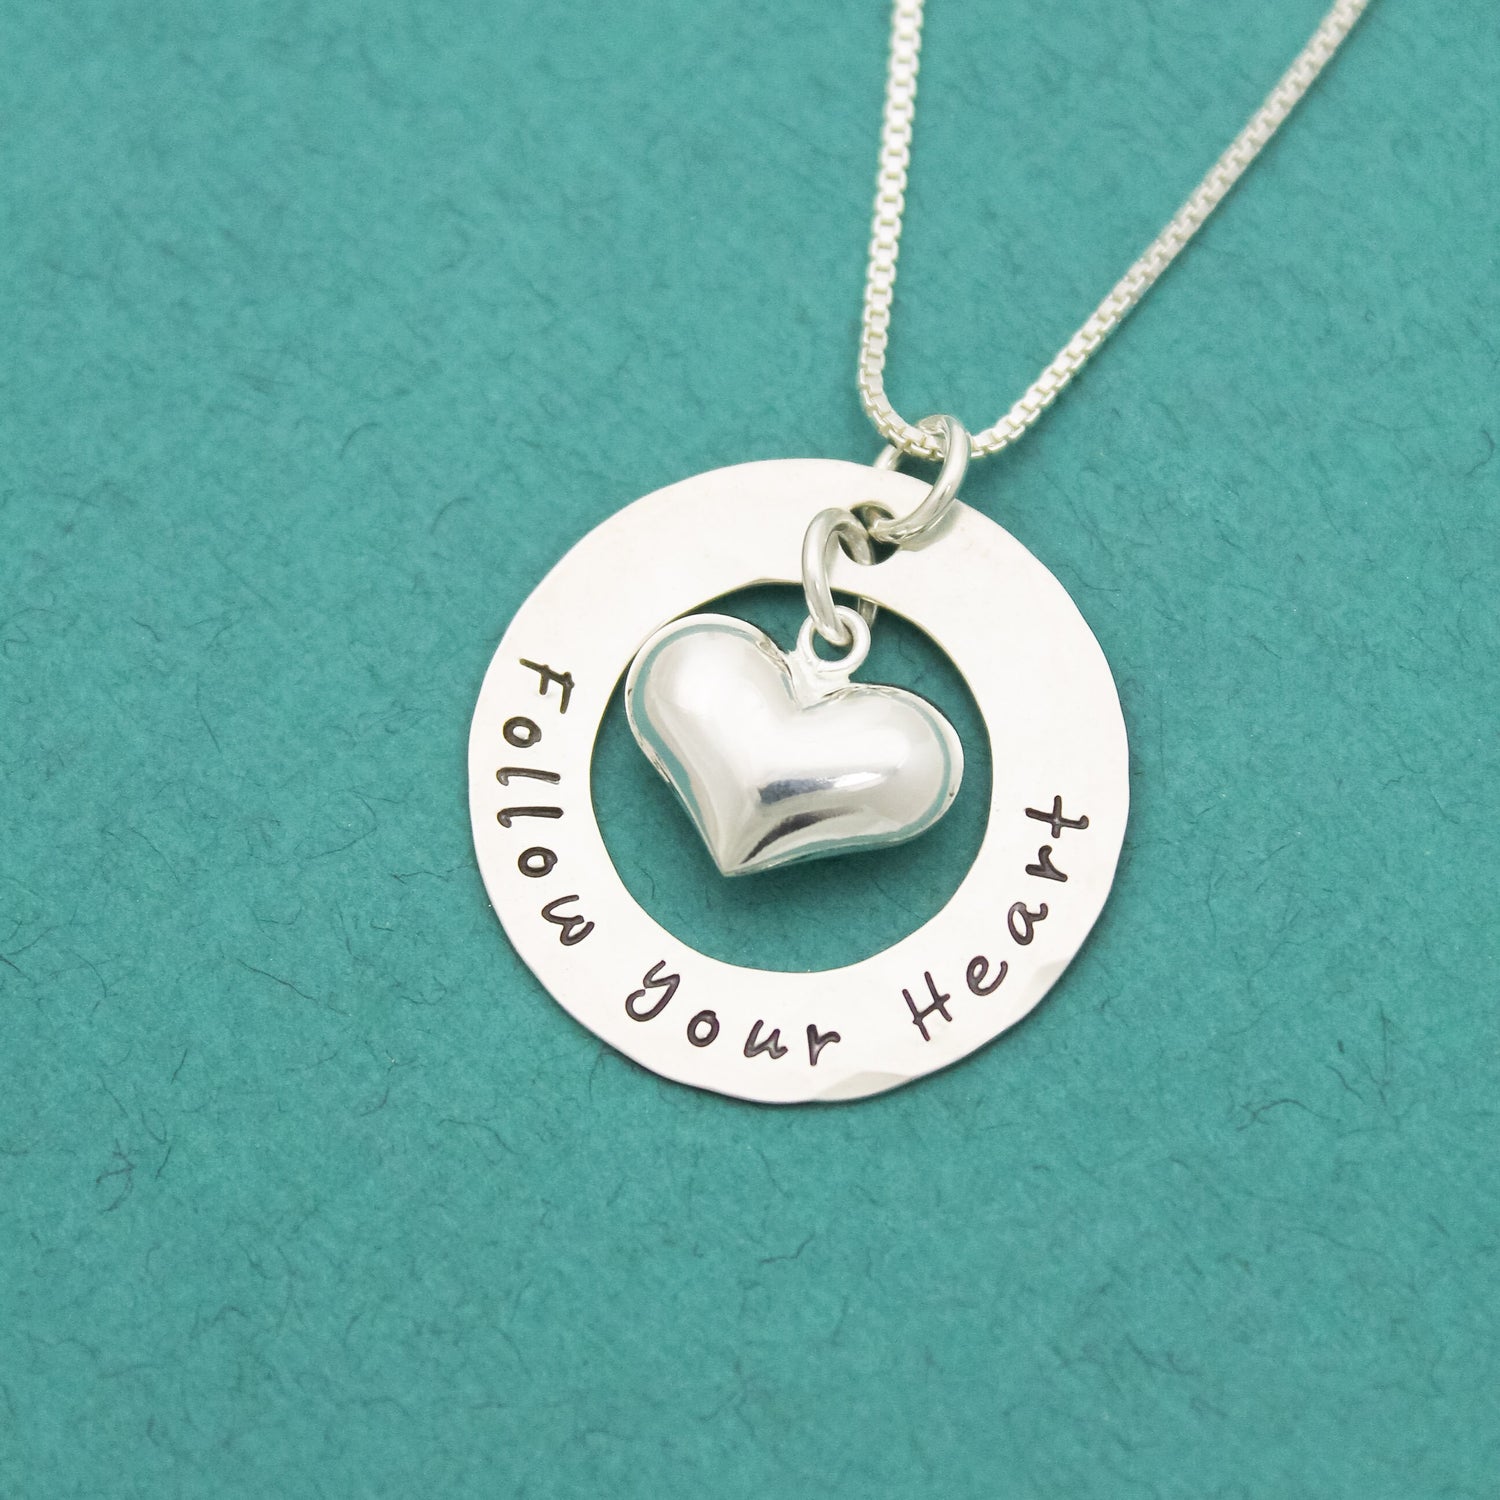 Follow Your Heart Necklace, Follow Your Heart Gift, Graduation Gift, Valentine's Day Gift, Gifts for Her, Heart Jewelry, Grad Gift for Her